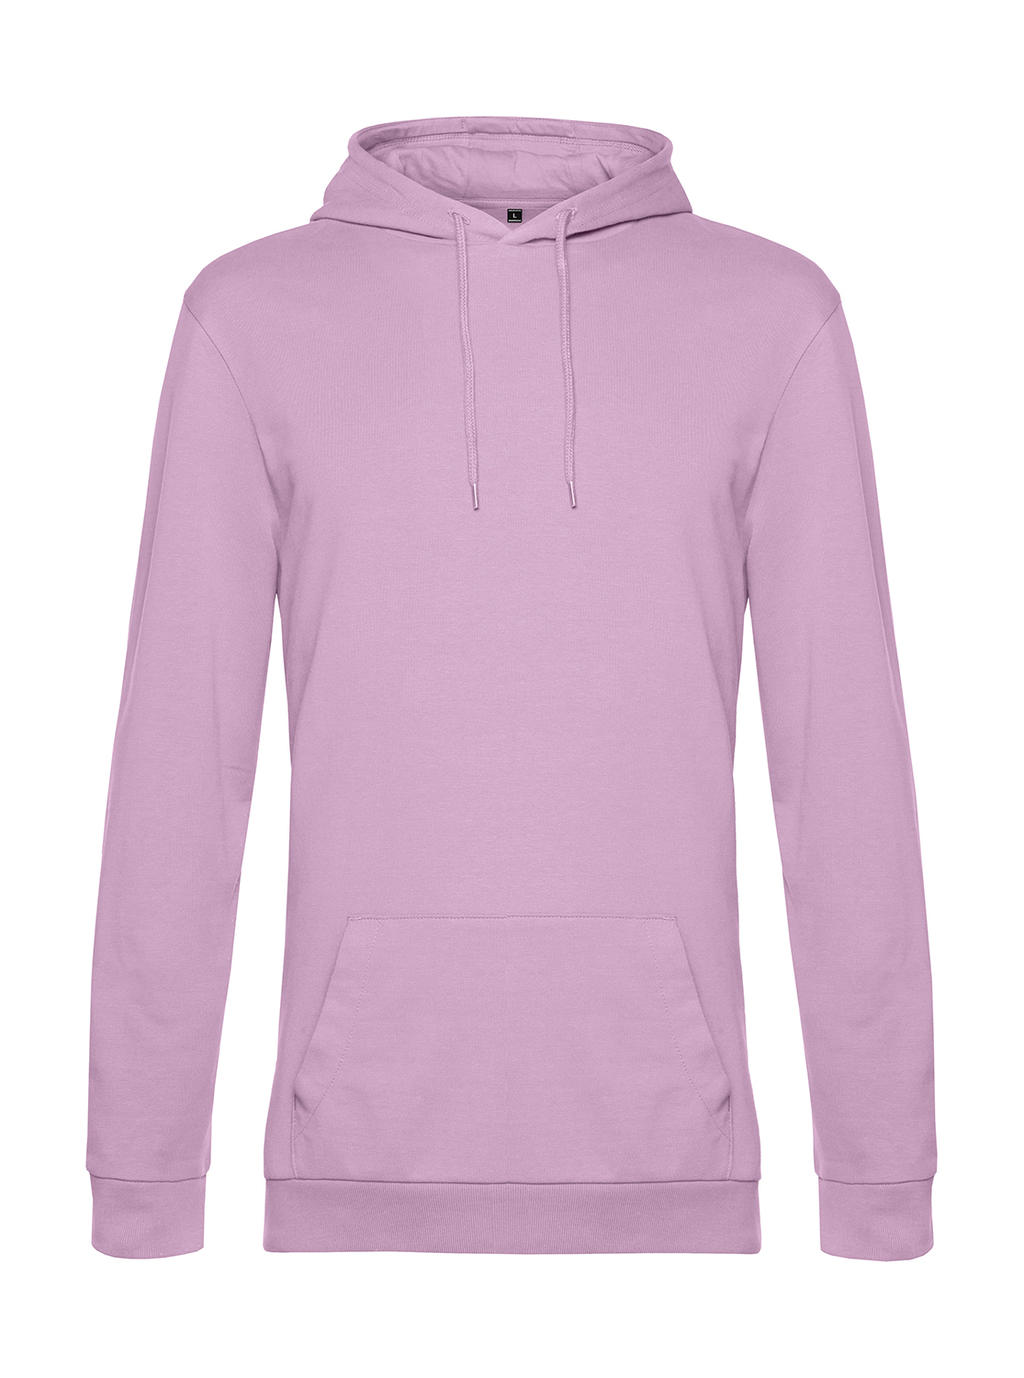 Mikina s kapucňou #Hoodie French Terry - candy pink